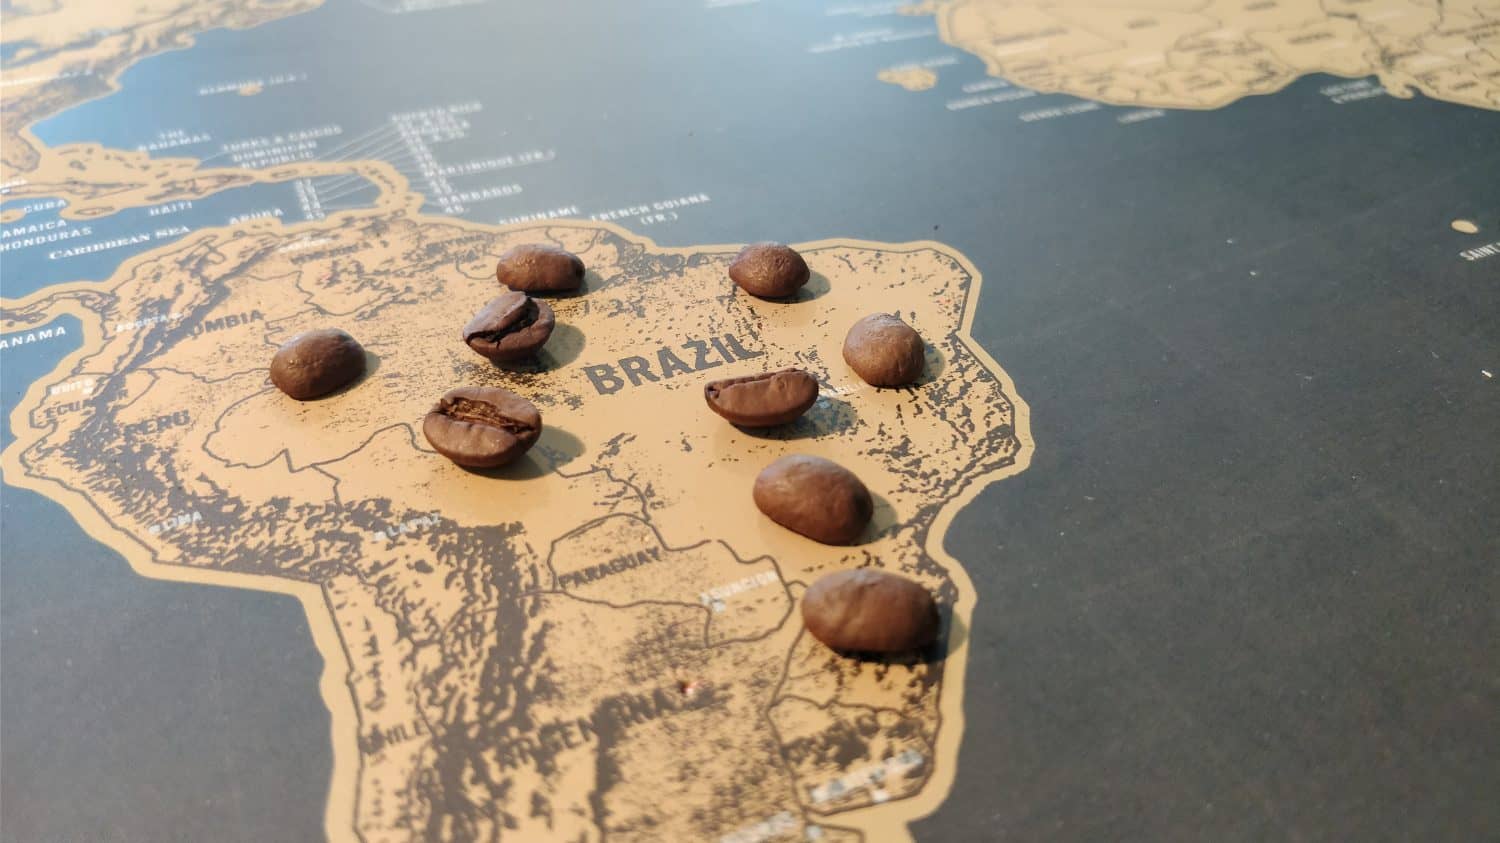 Brazil map with coffee beans